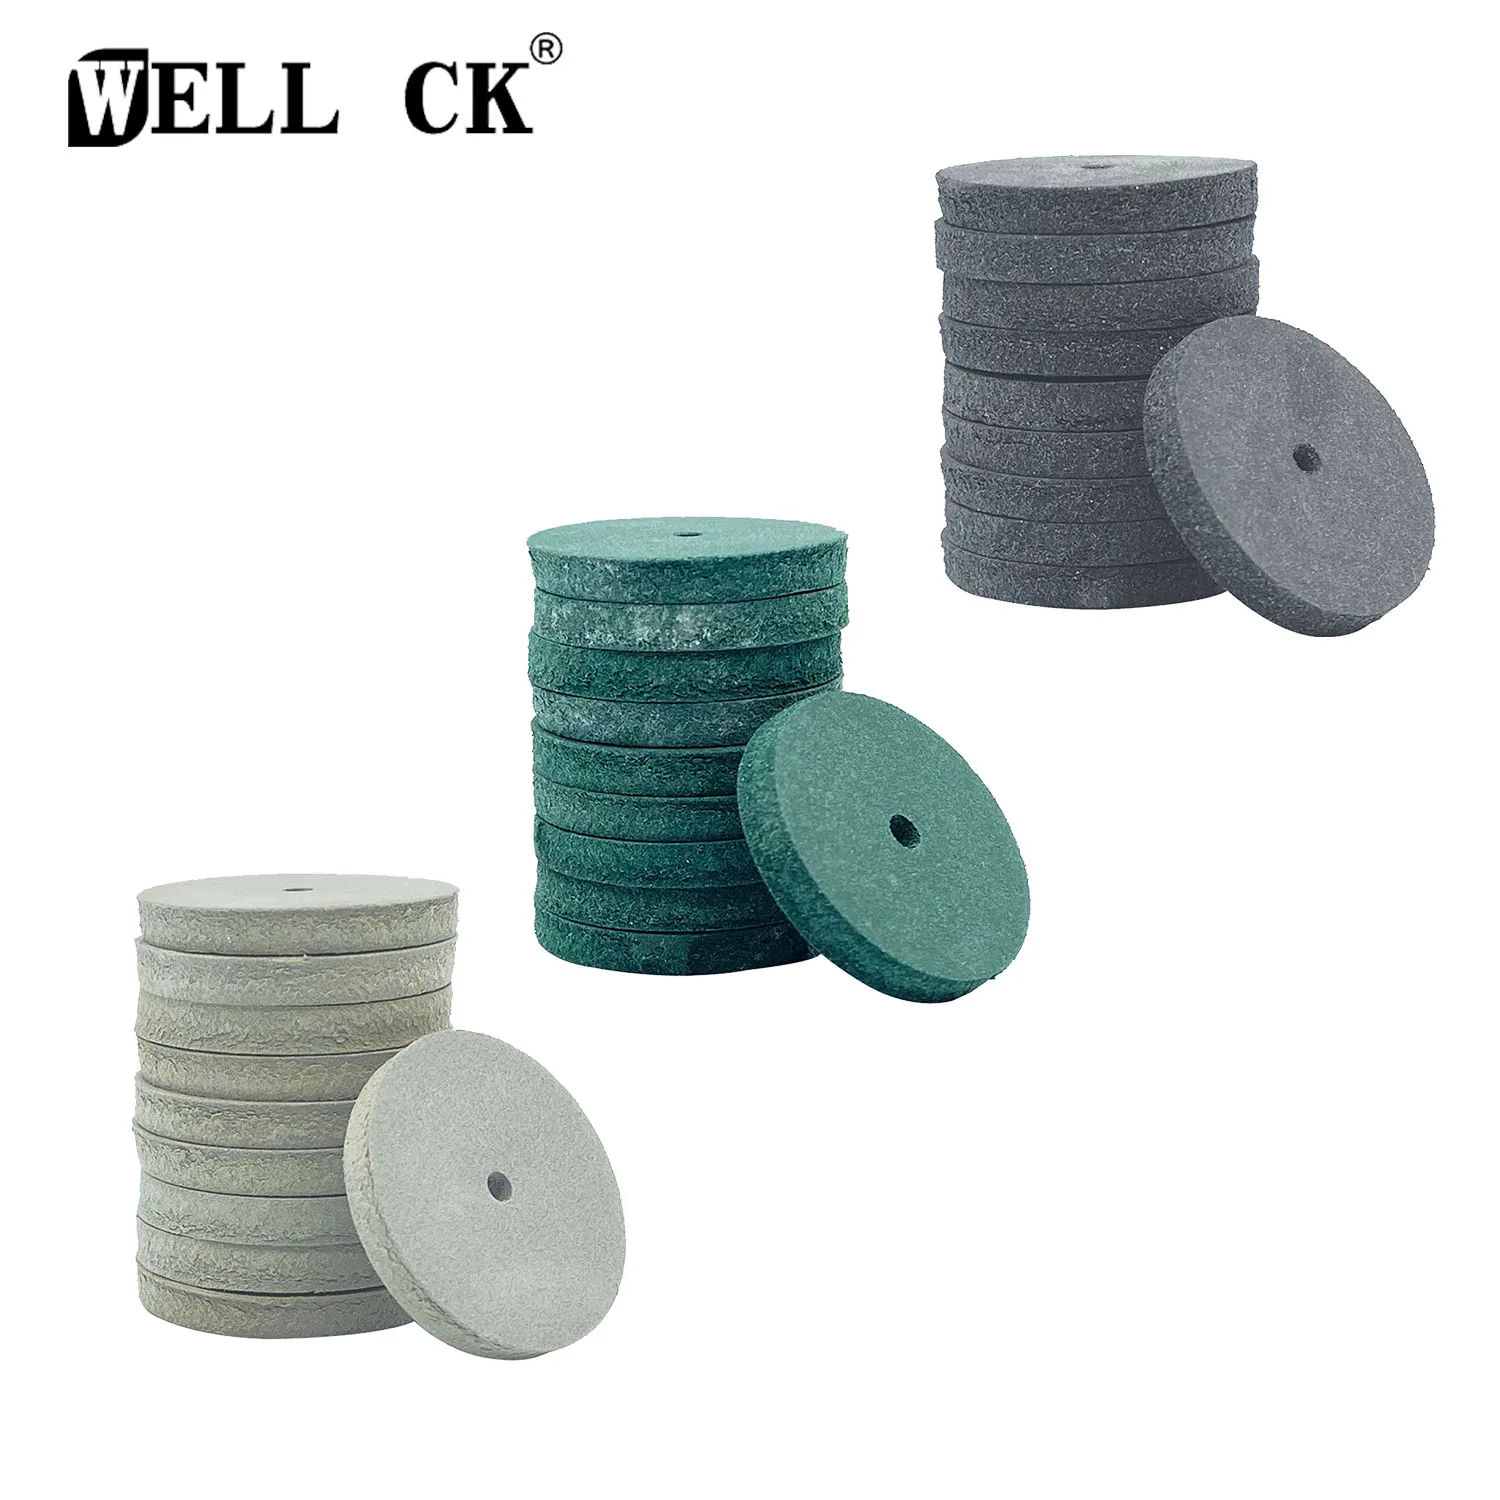 WELL CK 30pcs Rubber Polishing wheels Dental Jewelry Rotary Tool 3 Colors Polisher mixed colors